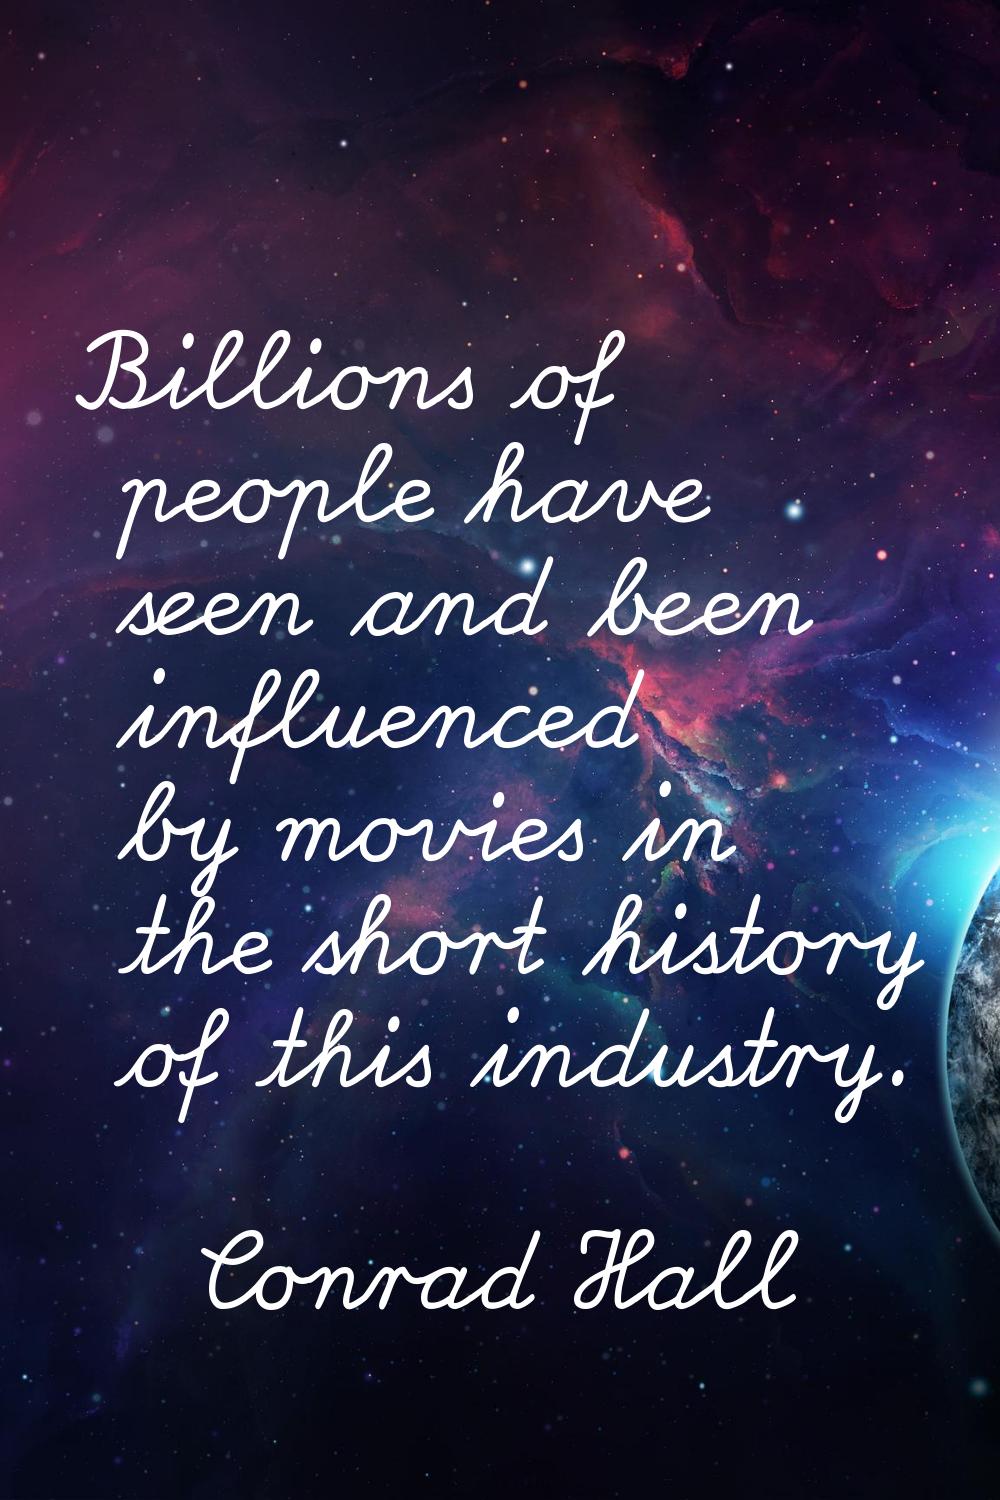 Billions of people have seen and been influenced by movies in the short history of this industry.